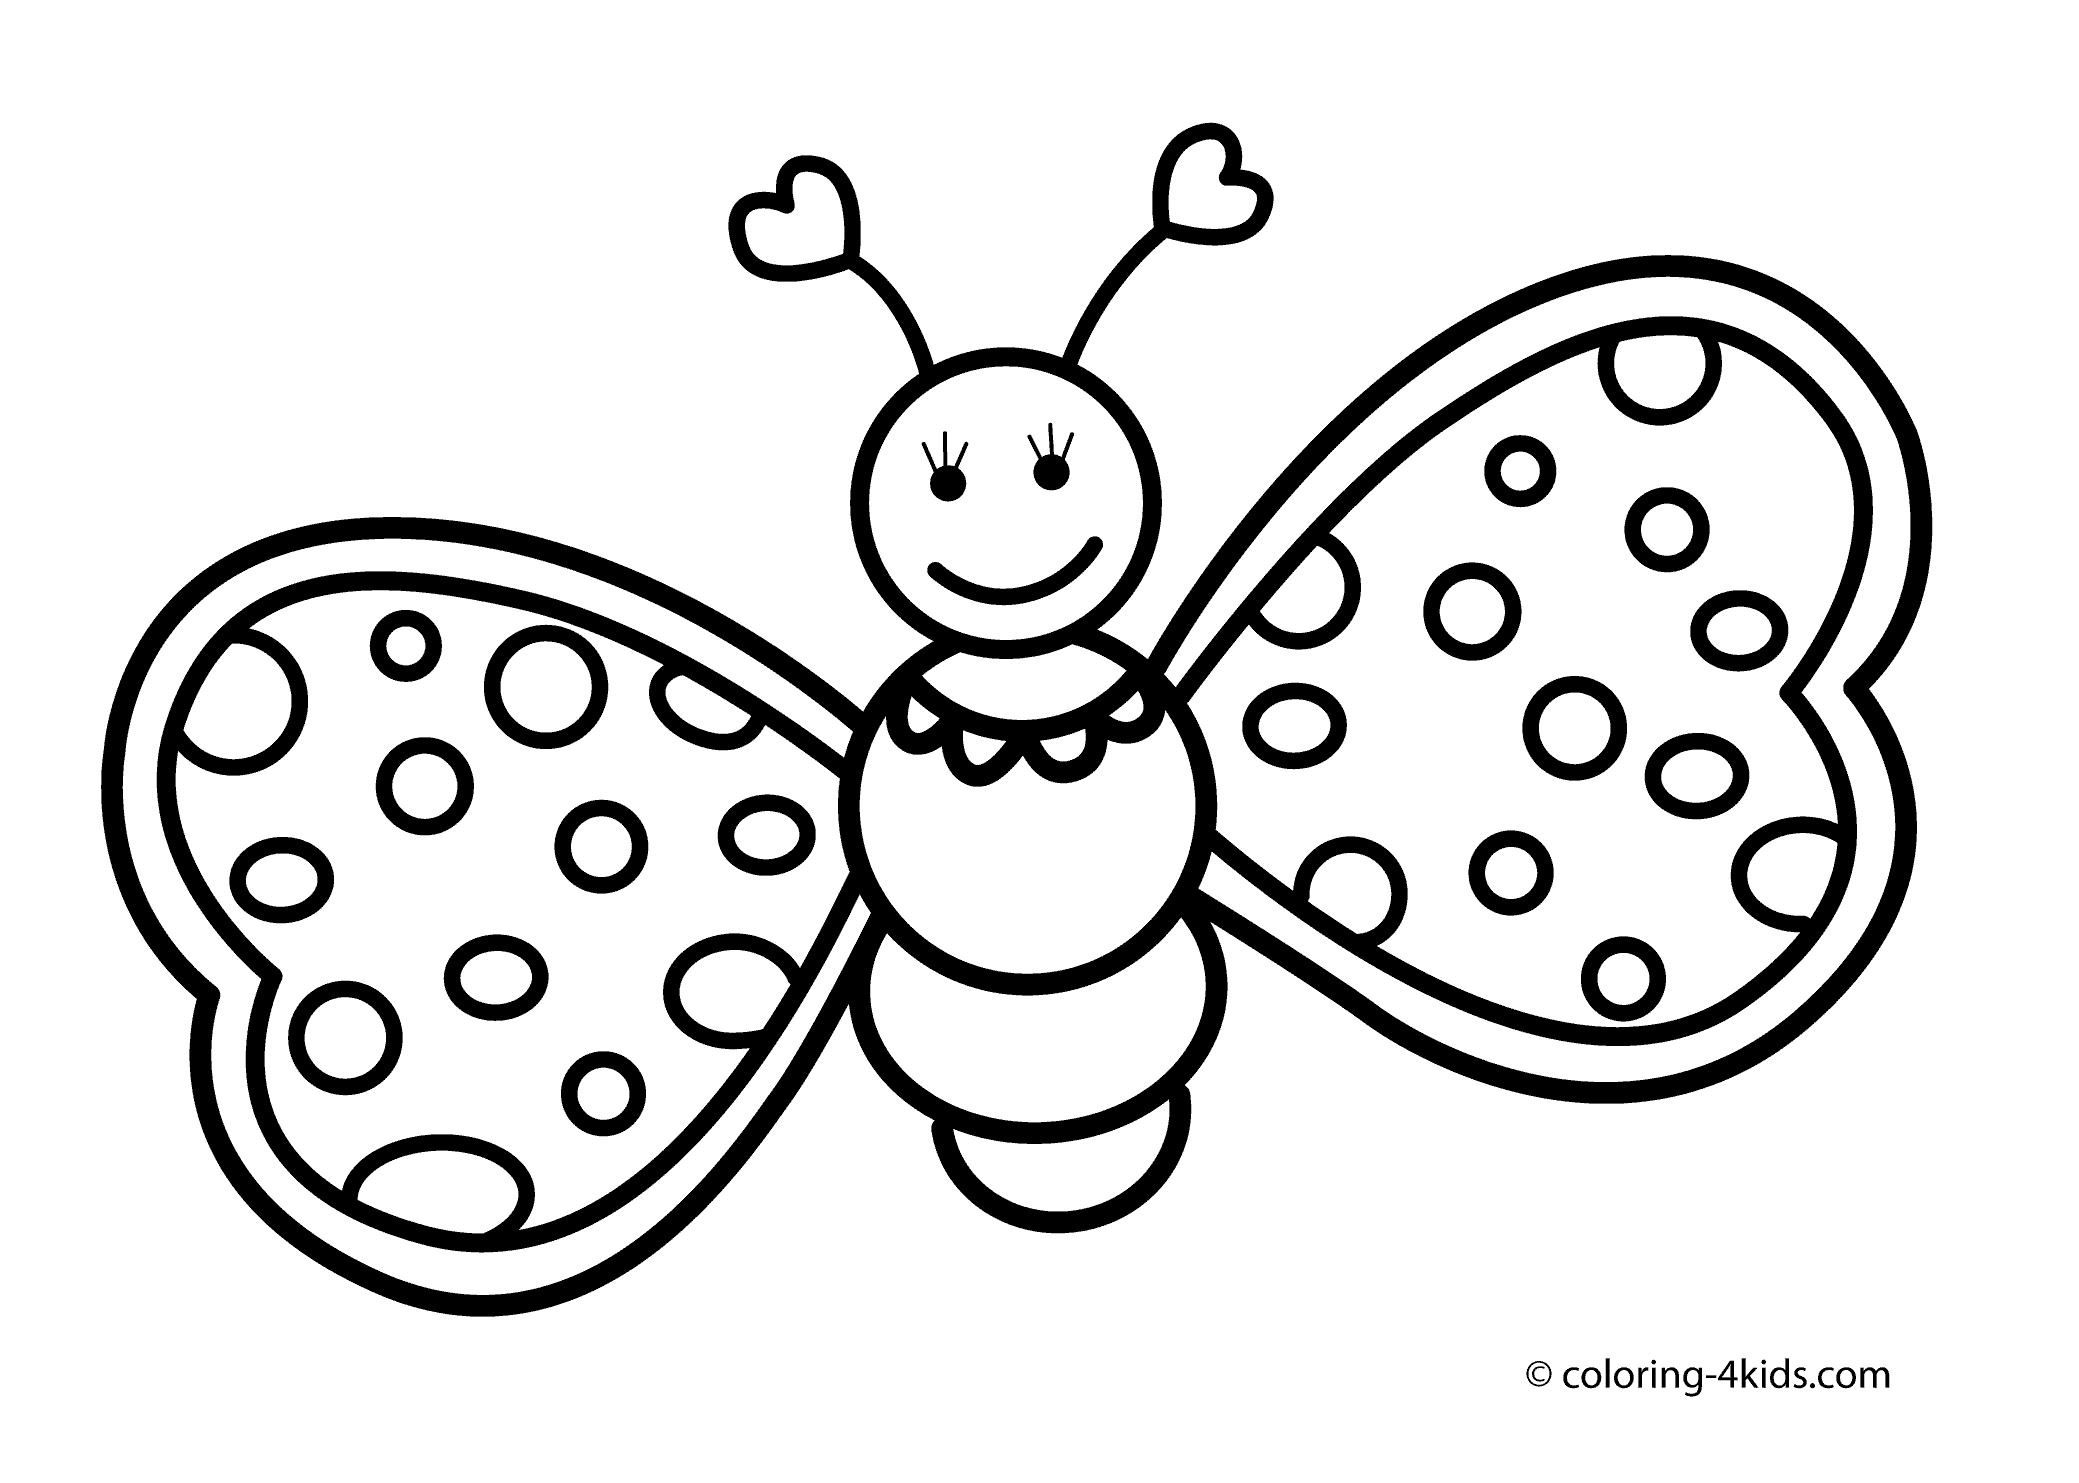 Butterfly coloring pages cute for kids, printable free | coloing ...